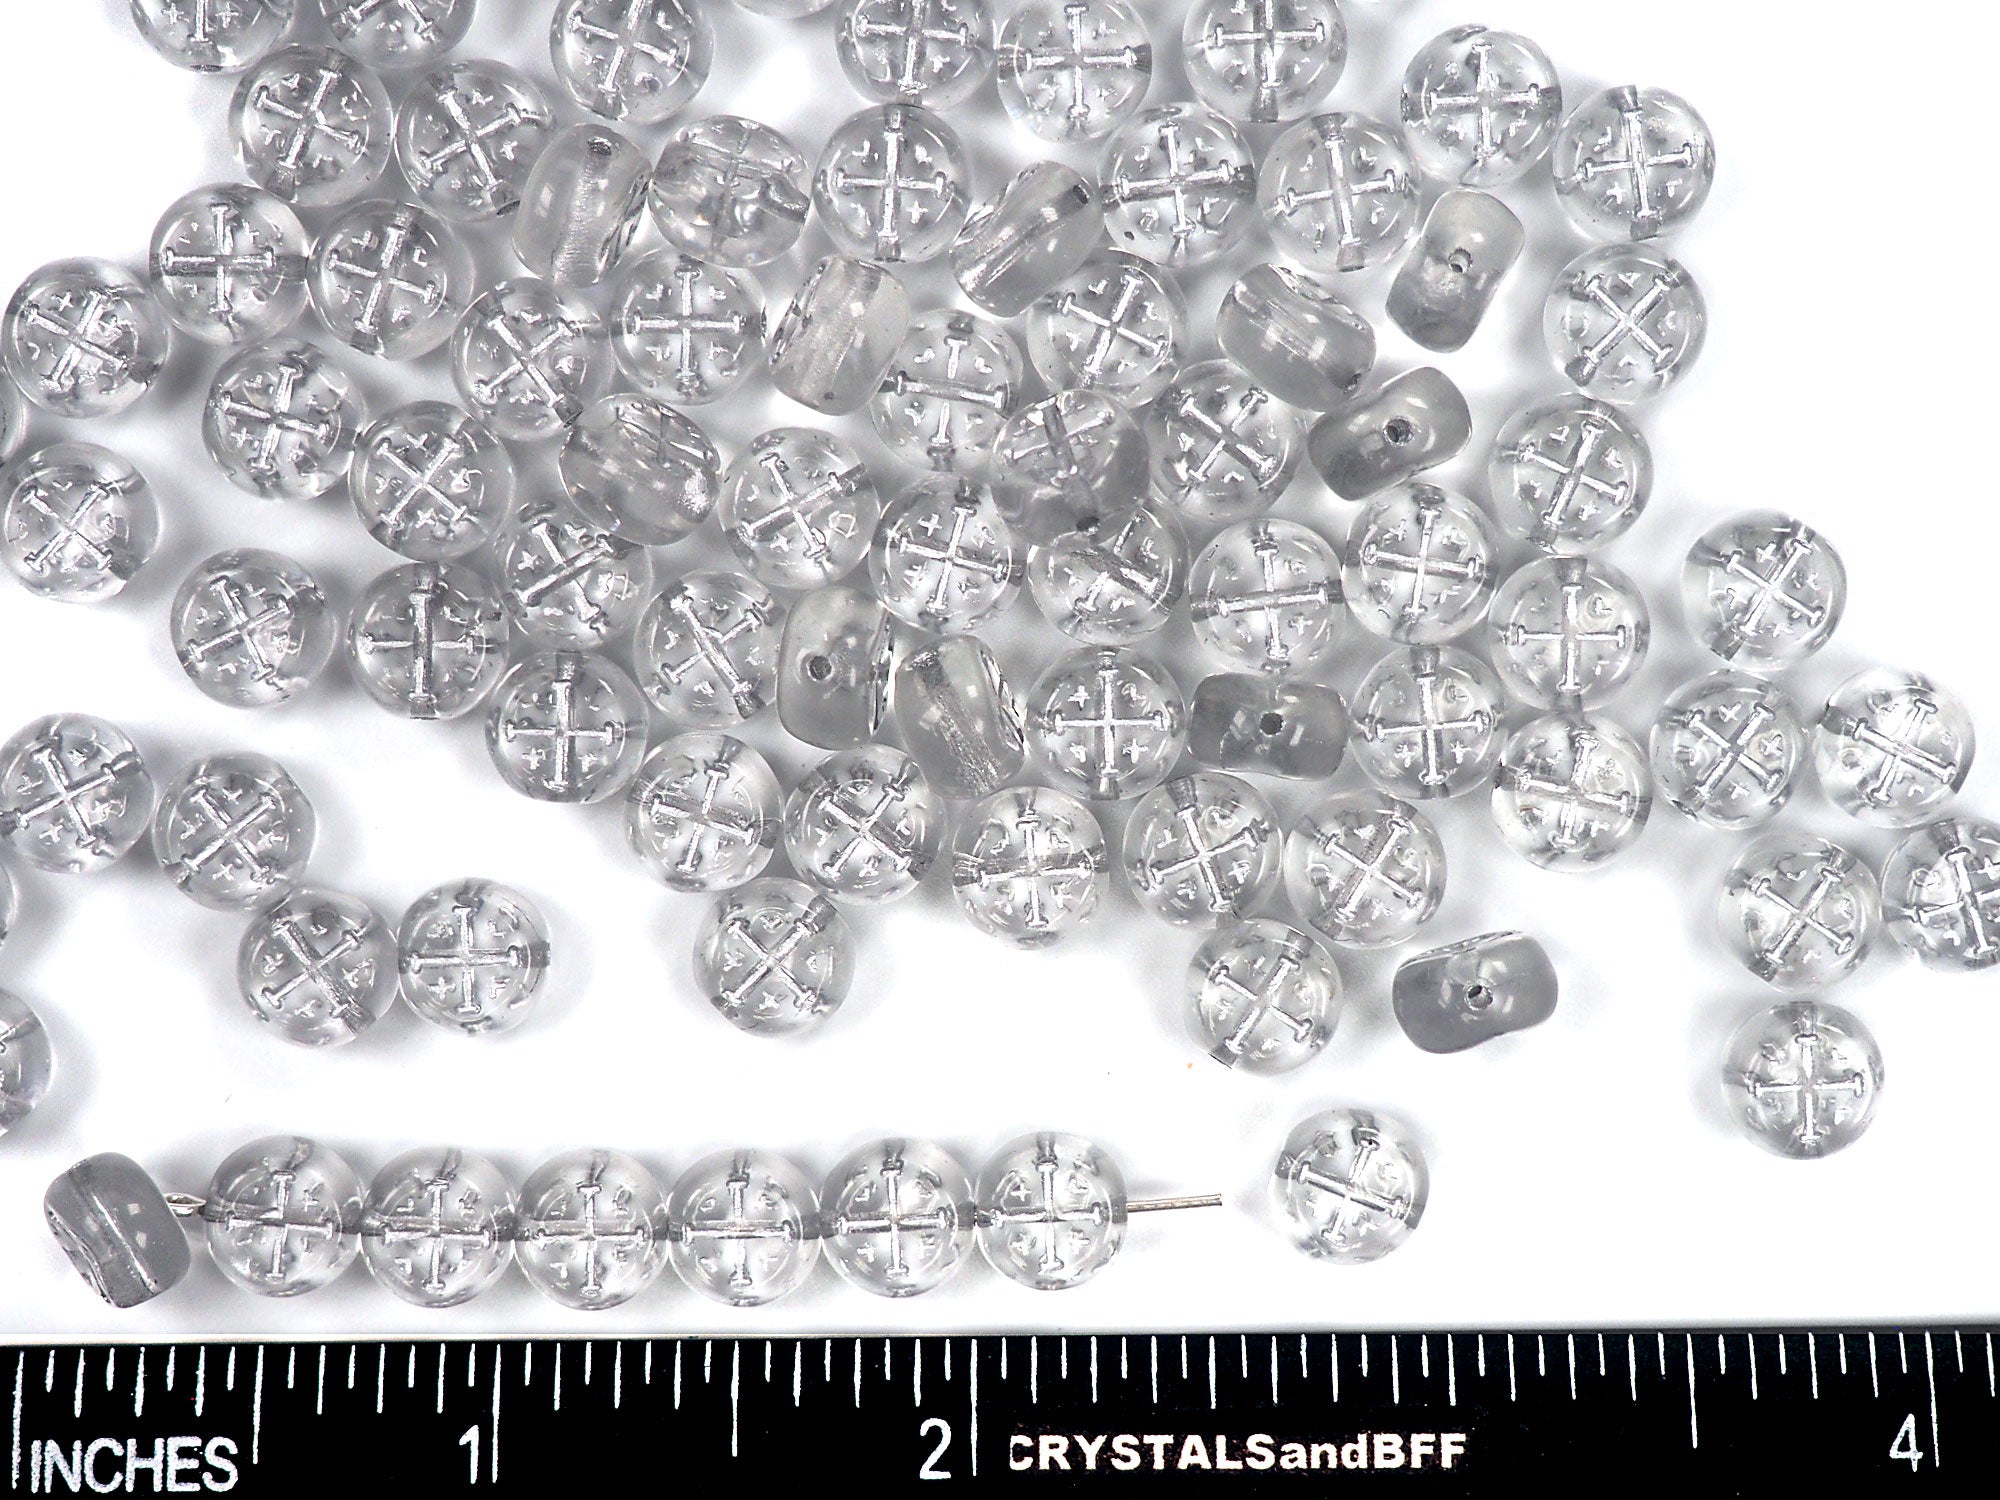 Czech Glass Druk Beads in size 8x5mm, Clear Crystal with Silver Painted Cross, 24pcs, P898